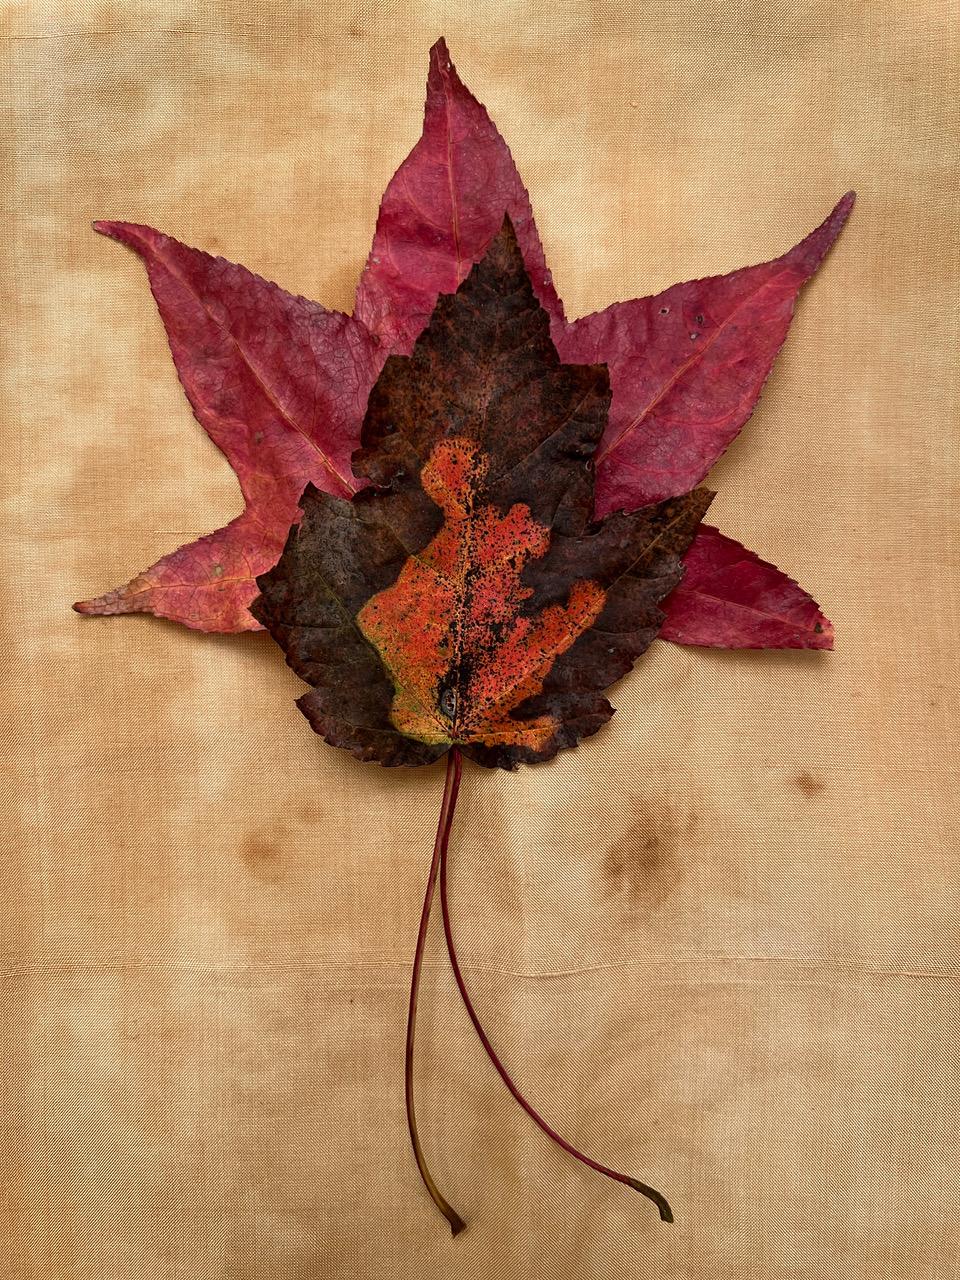 Nine Leaves: grid w/ nature still life leaf photographs in gold, red, green For Sale 2